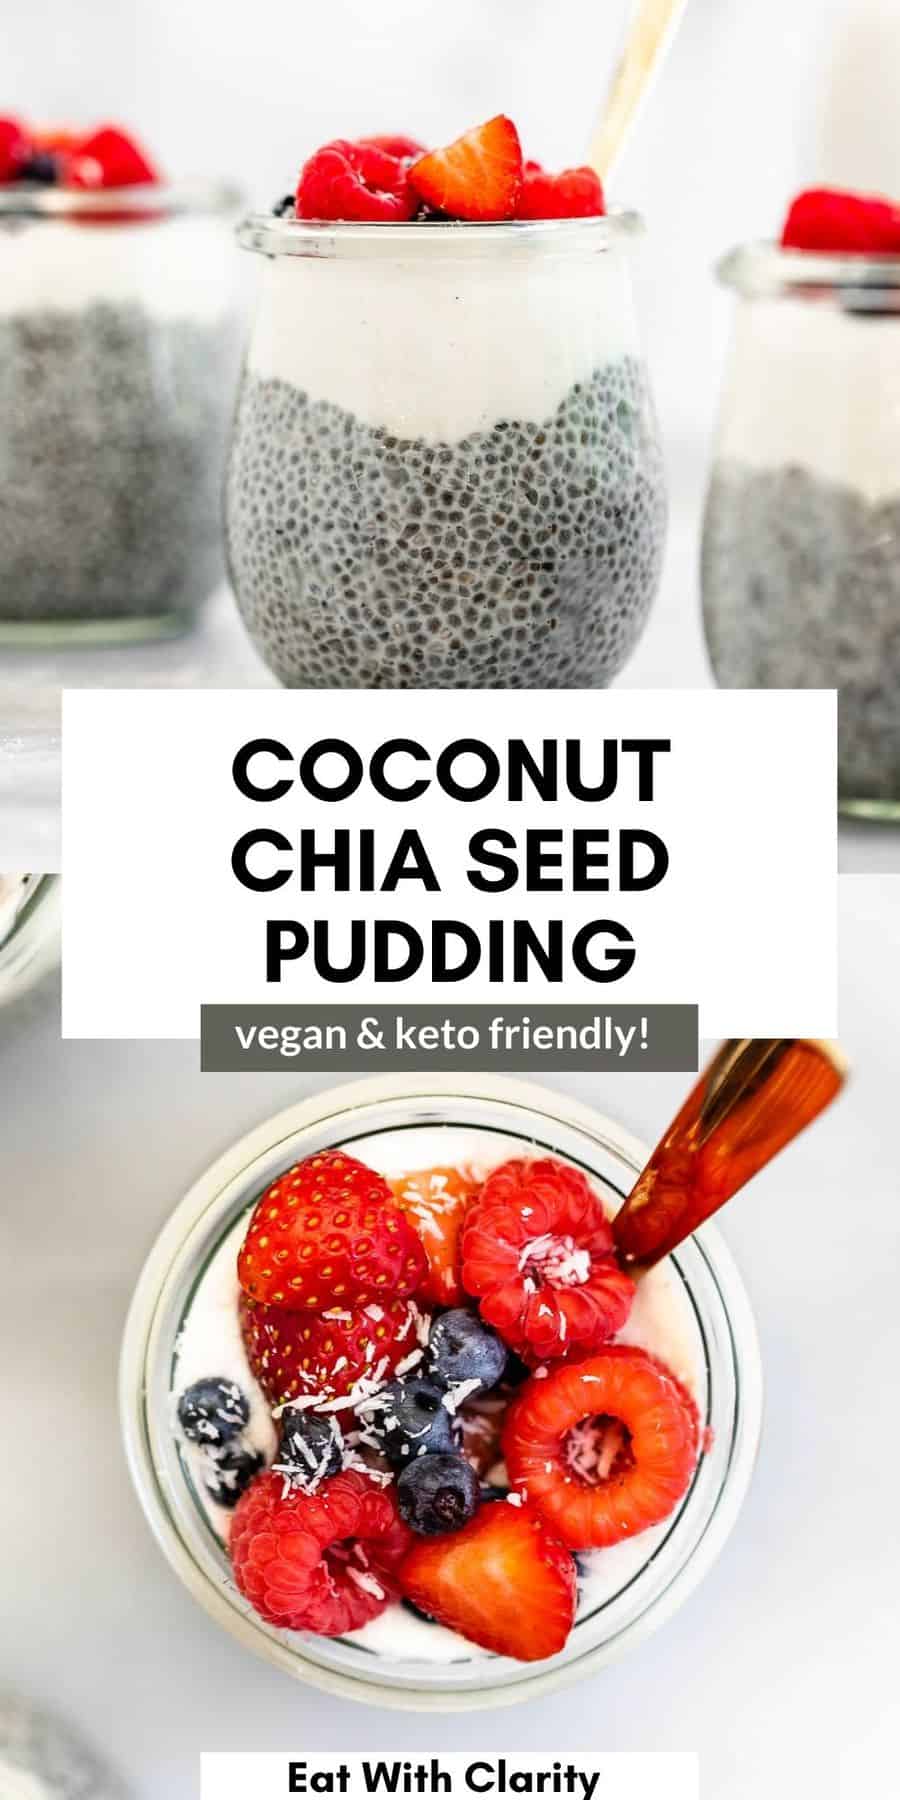 How To Make Chia Seed Pudding - Eat With Clarity